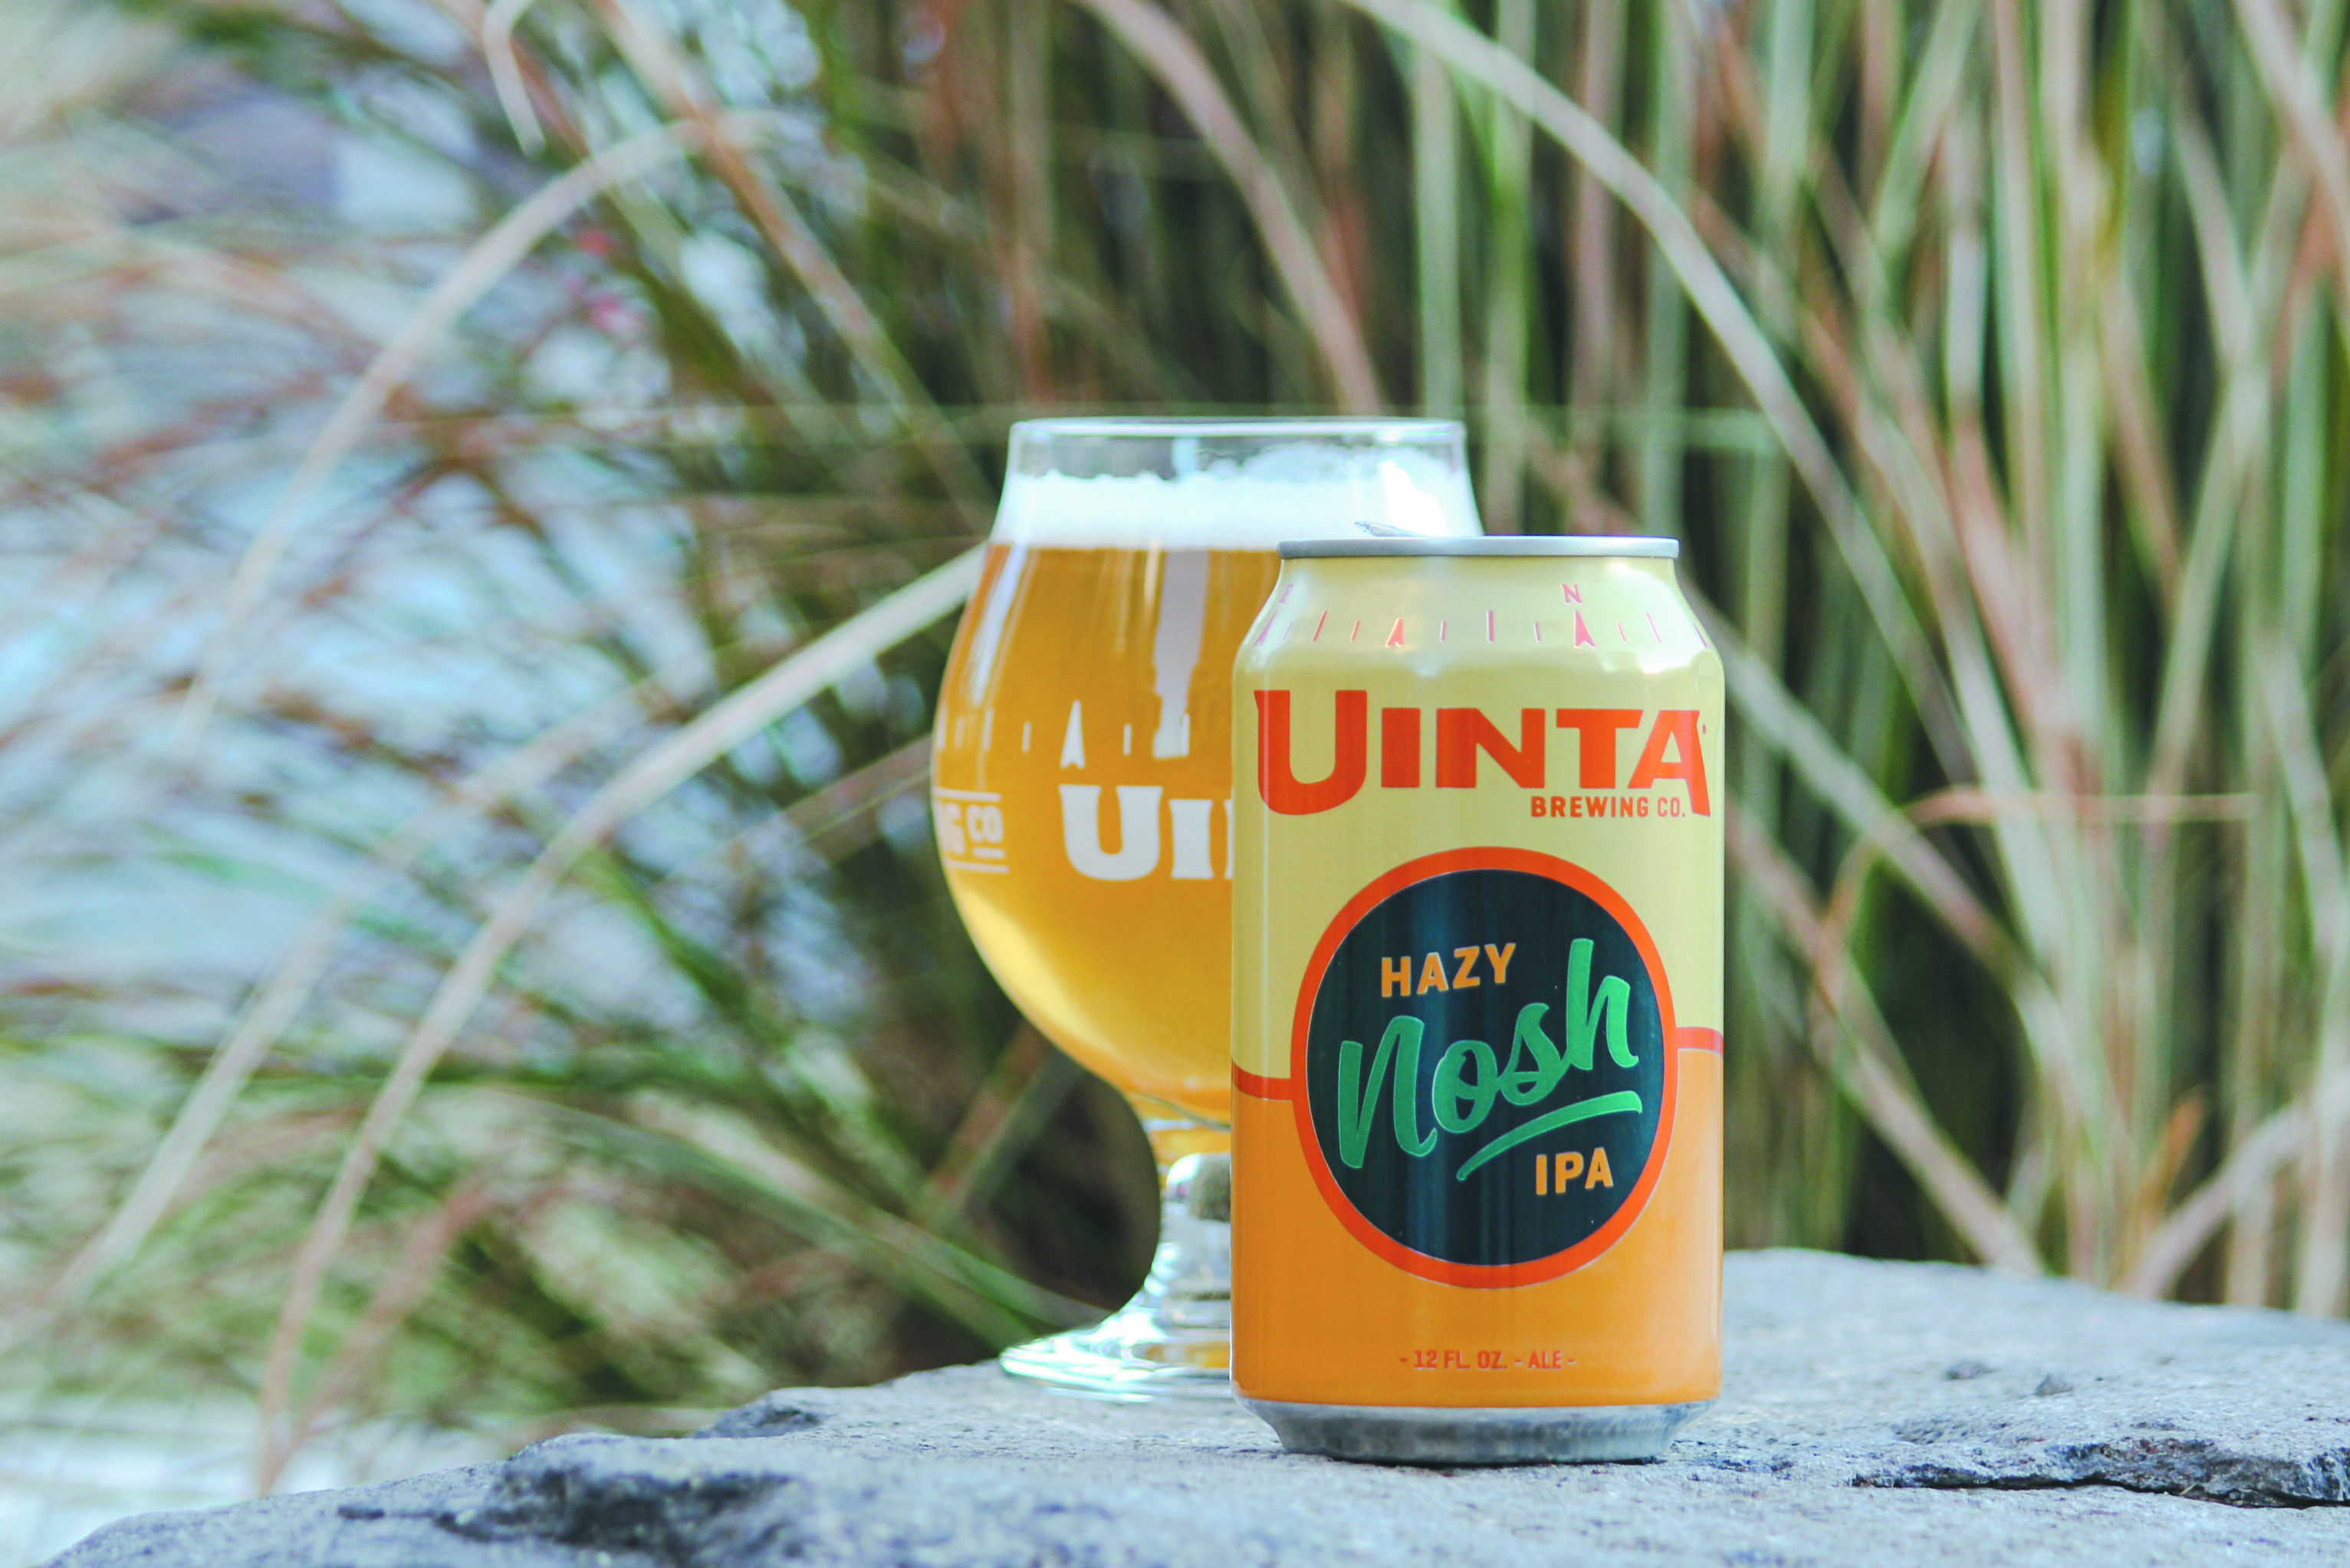 “The hops for this beer were selected for their oil content and citrus-forward presentation,” says Patrick Keahey, Uinta Brewing Head R&D Brewer.